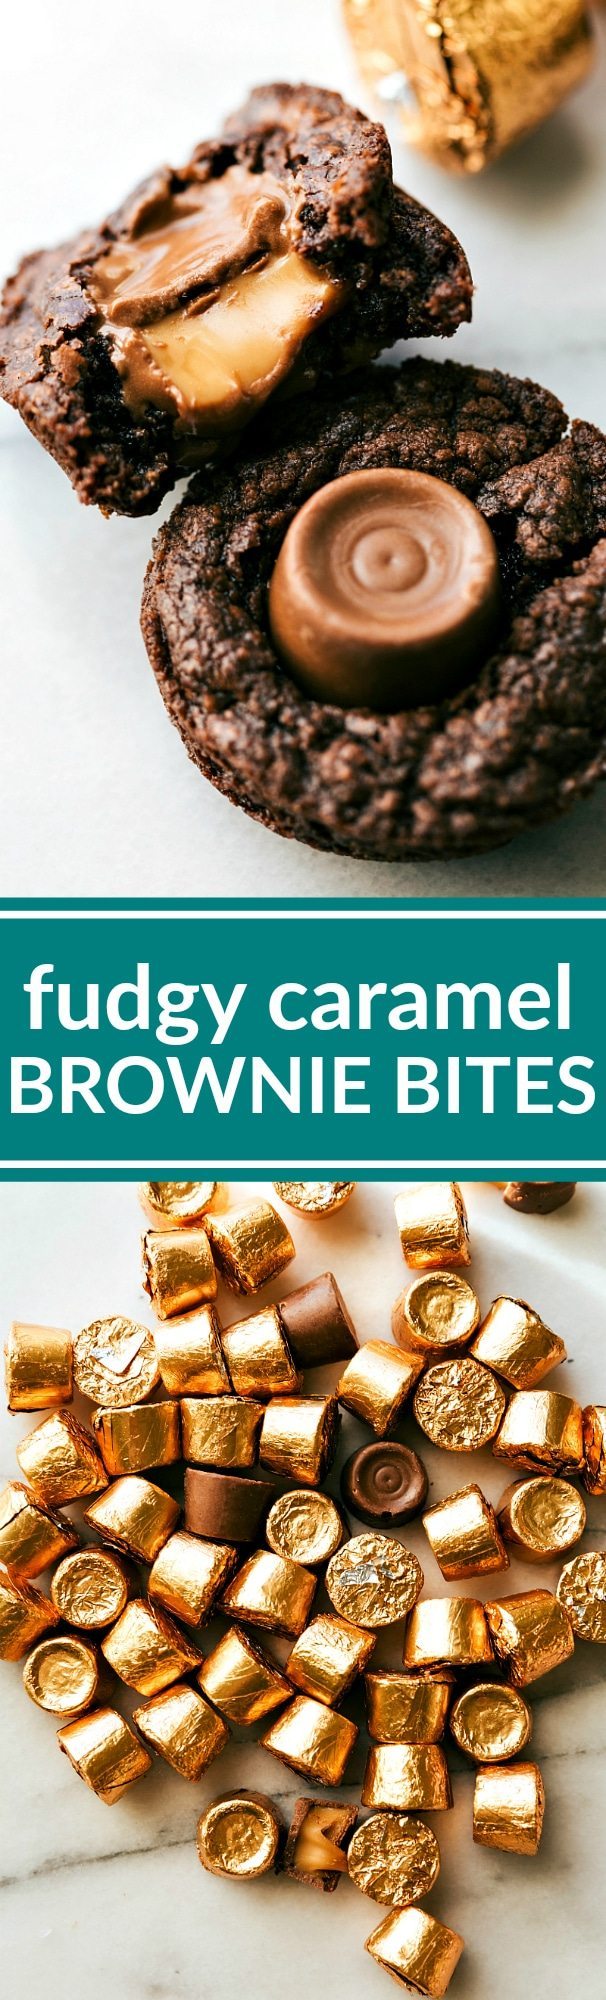 CREAM CHEESE BROWNIE CARAMEL BITES! An easy and ultra fudgy brownie base filled with a chocolate caramel candy. Pure caramel chocolate bliss in an easy to make dessert! via chelseasmessyapron.com